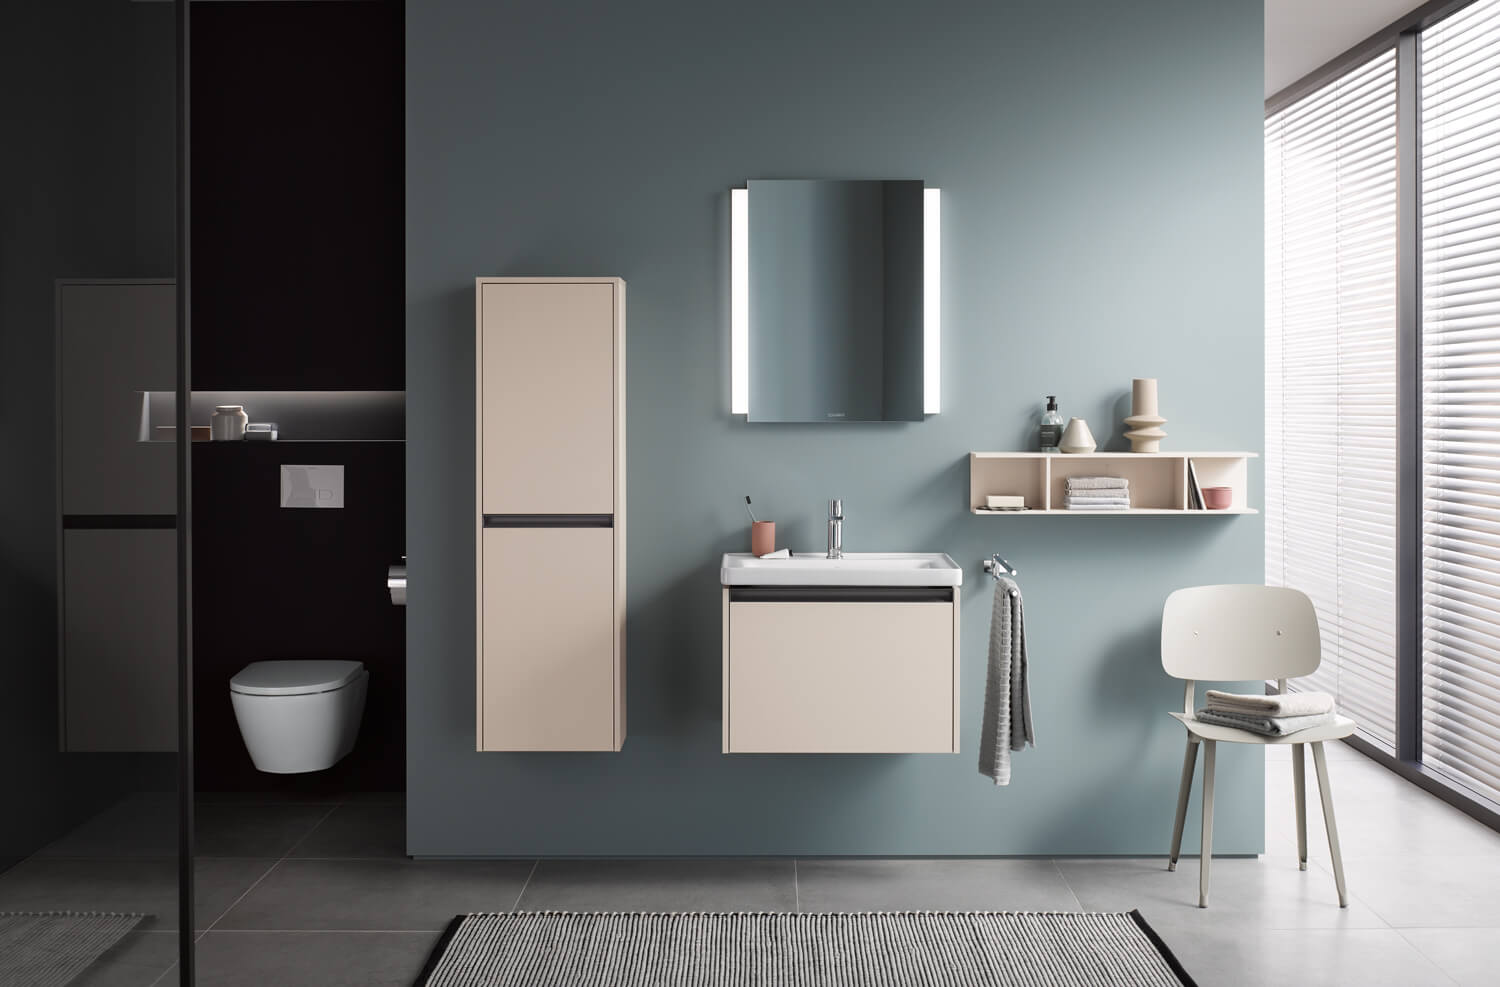 Bathroom Furniture—Functional and Attractive